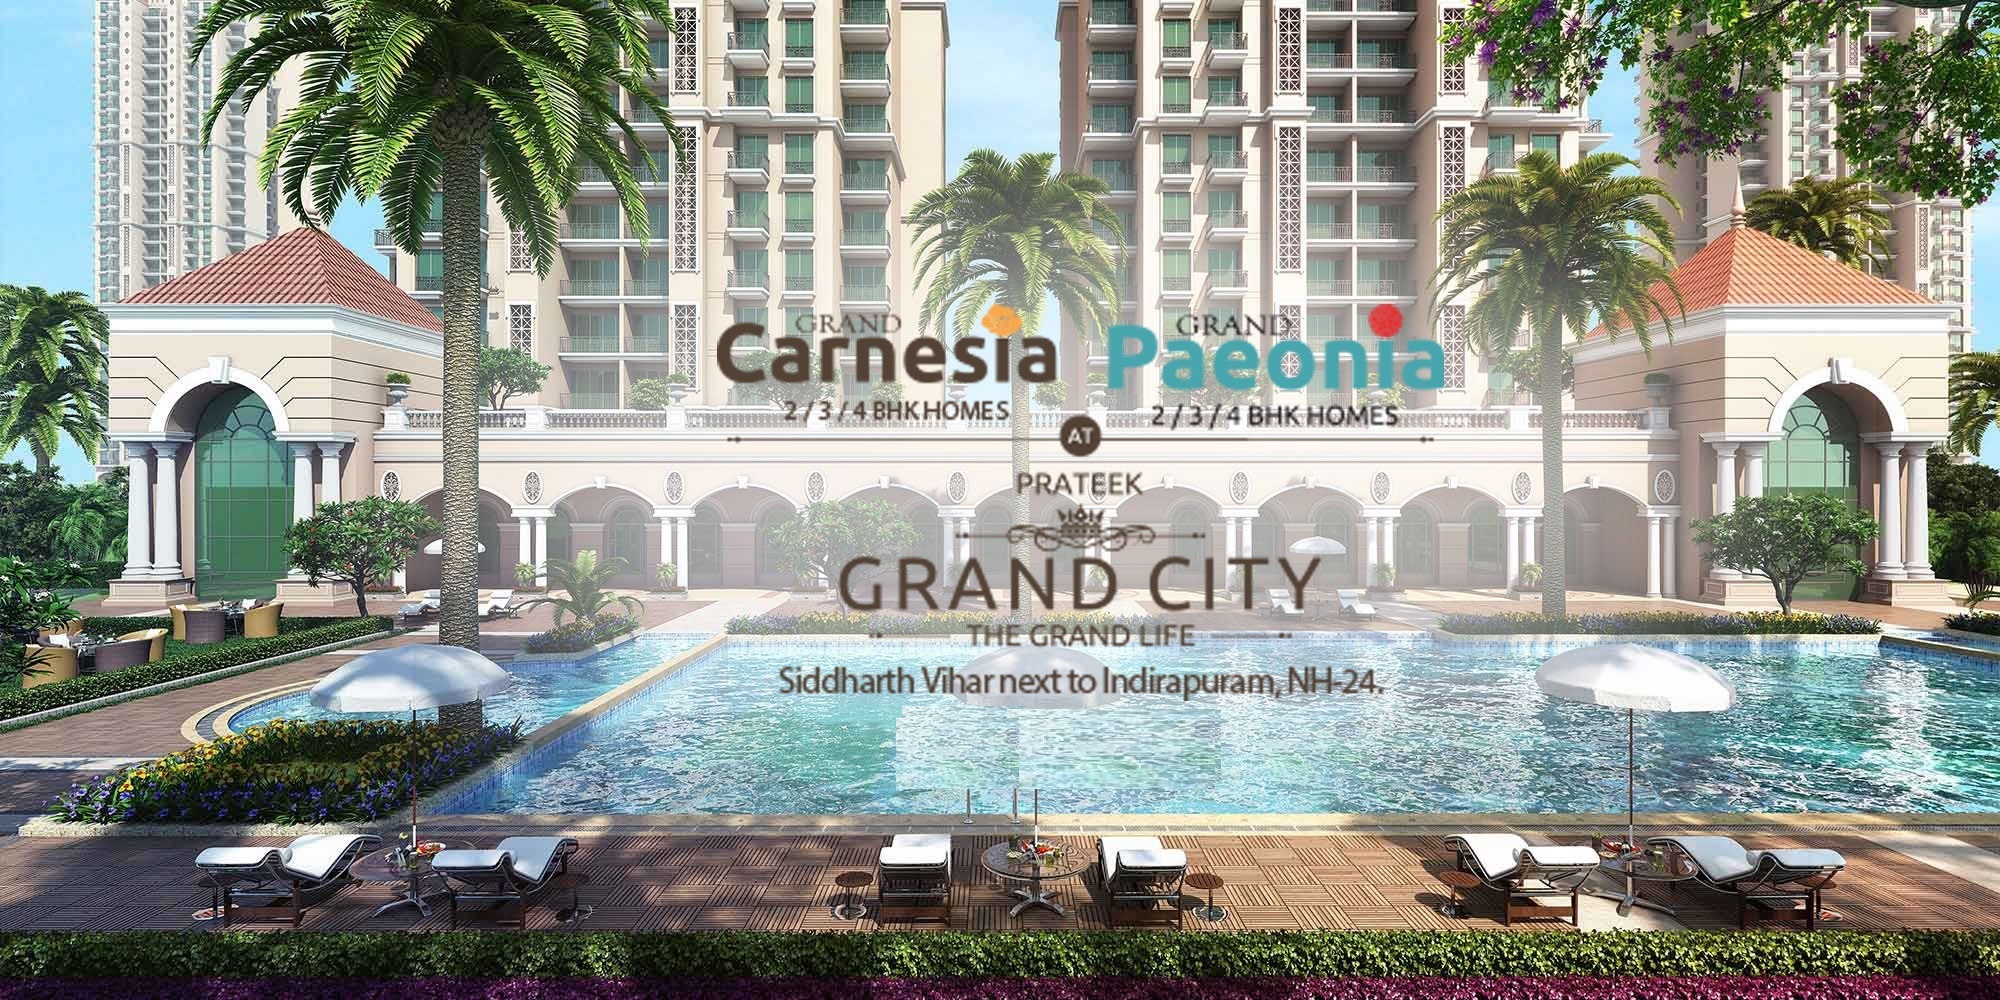 Prateek Grand City offers an option to live and nuture your dreams with extraordinary lifestyle Update